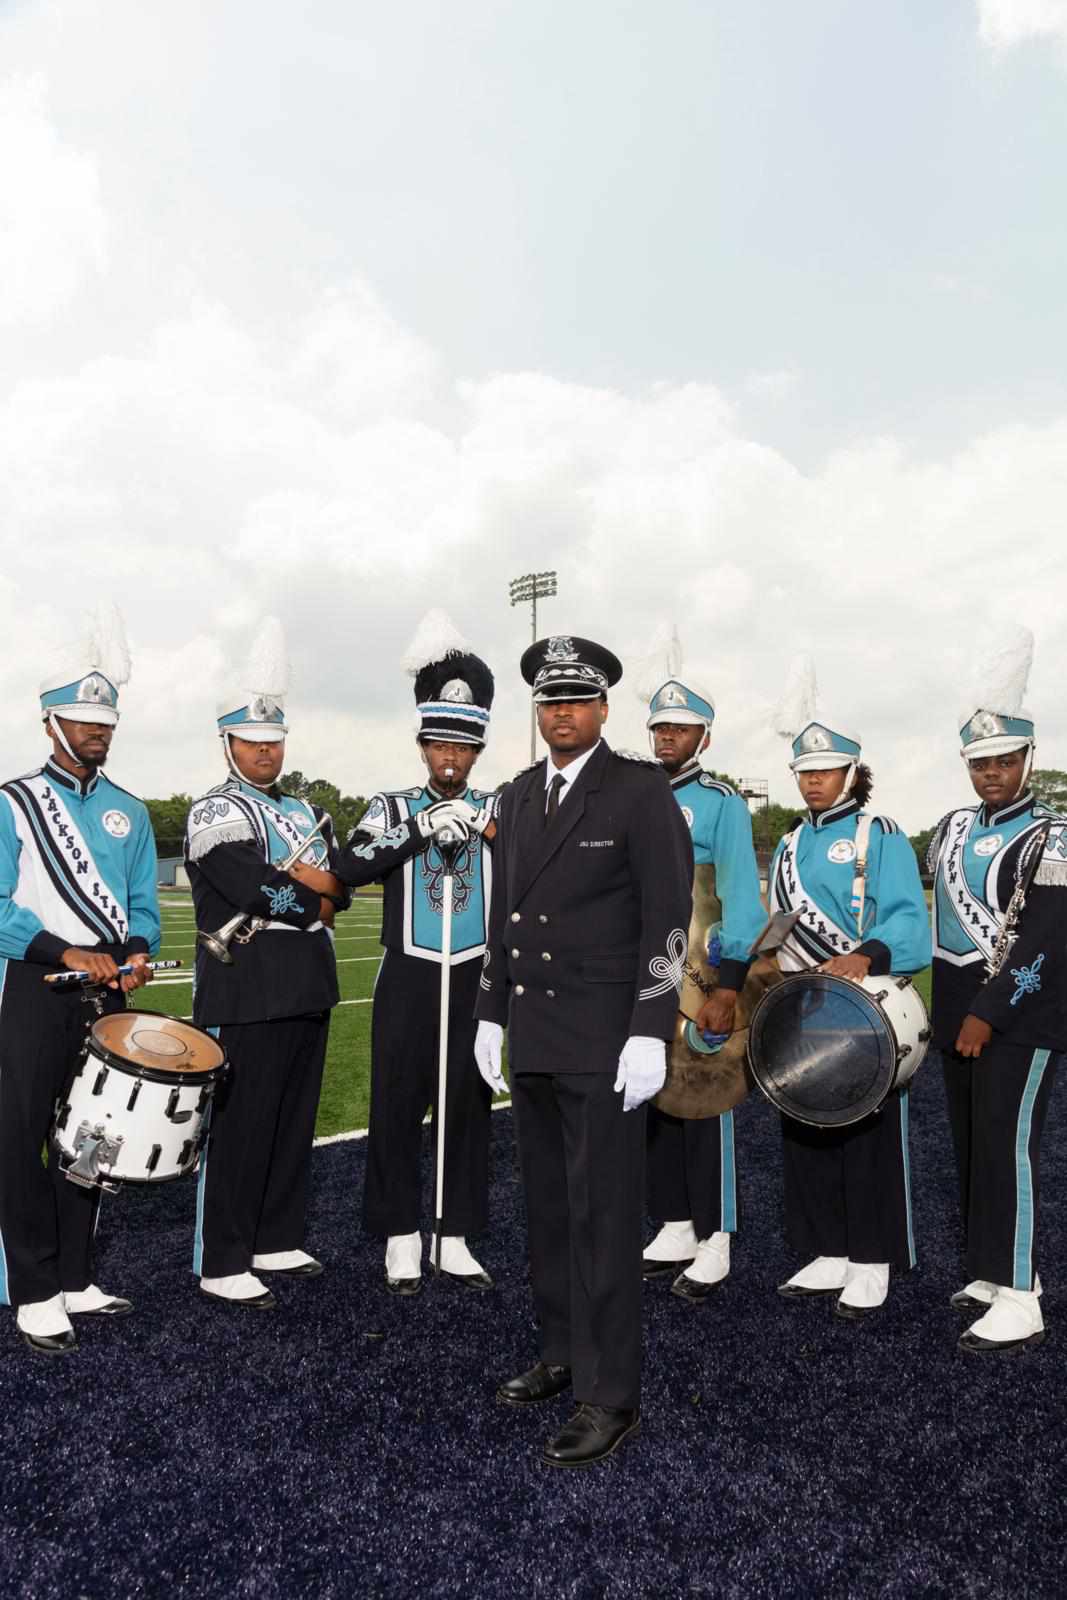 This Mississippi Marching Band is Famous for Its Electrifying Performances